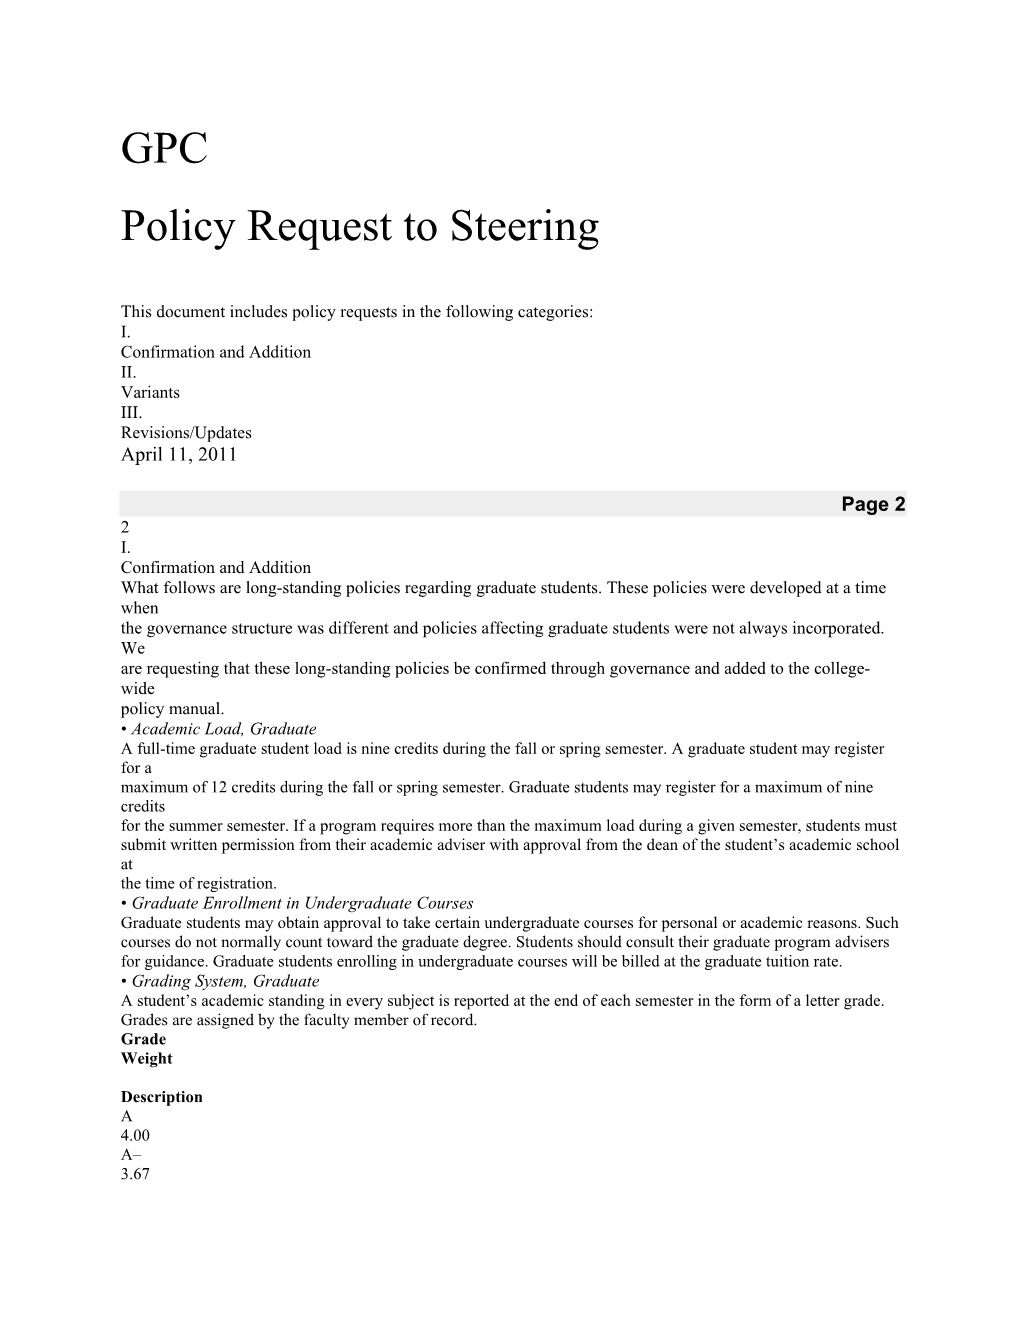 This Document Includes Policy Requests in the Following Categories